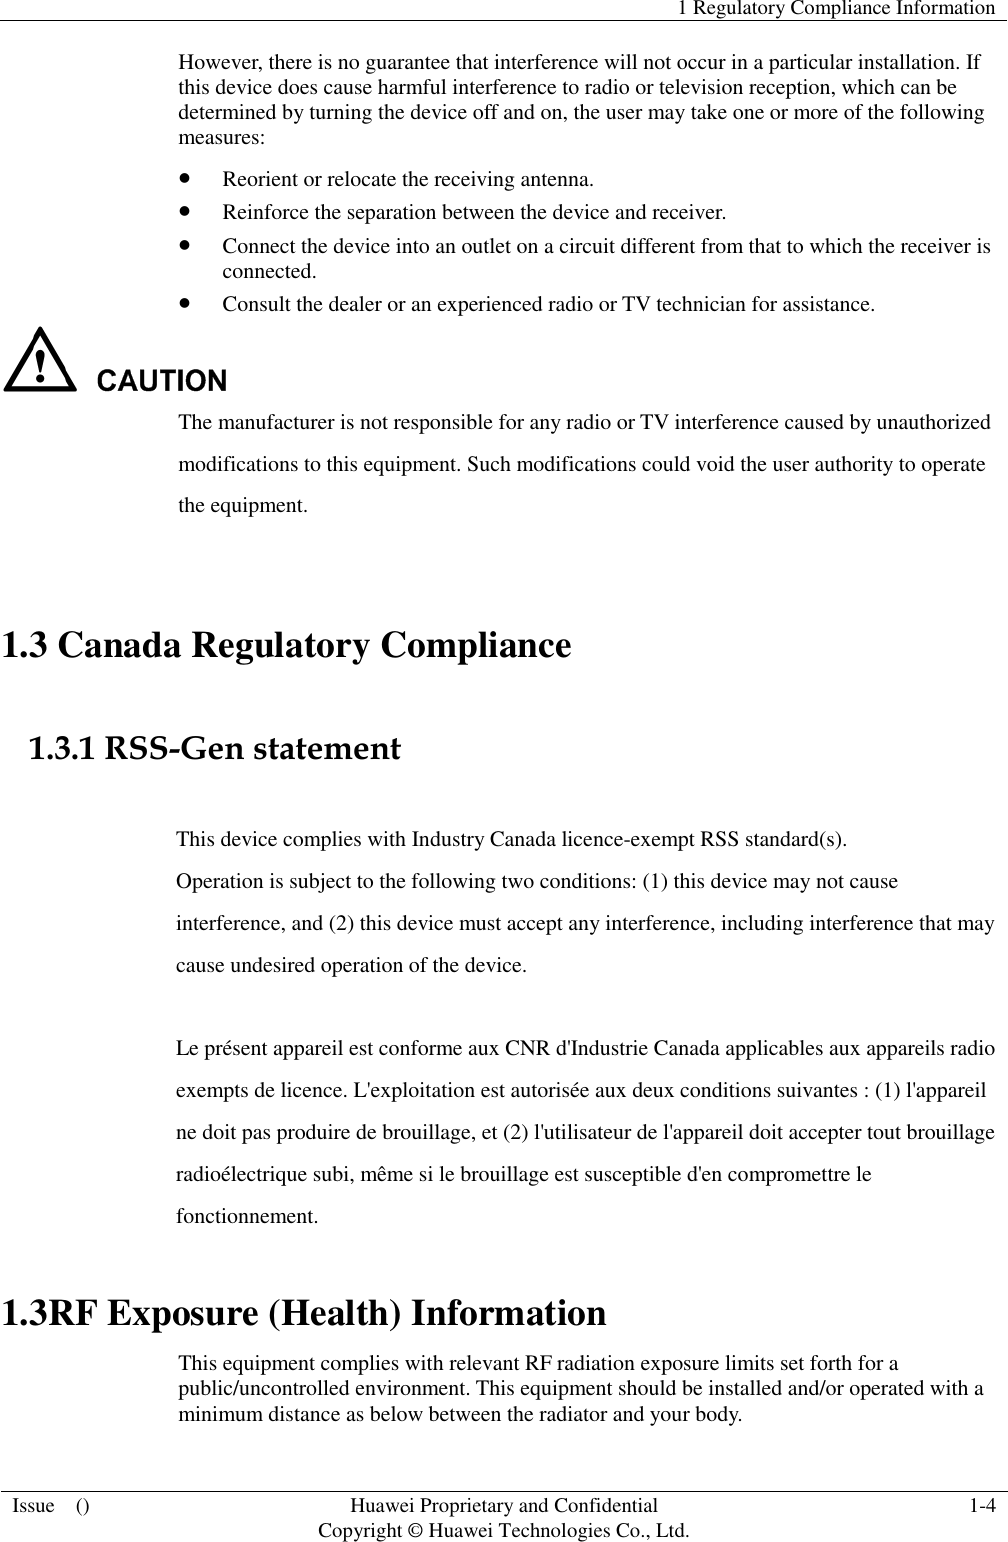   1 Regulatory Compliance Information  Issue    () Huawei Proprietary and Confidential                                     Copyright © Huawei Technologies Co., Ltd. 1-4  However, there is no guarantee that interference will not occur in a particular installation. If this device does cause harmful interference to radio or television reception, which can be determined by turning the device off and on, the user may take one or more of the following measures:  Reorient or relocate the receiving antenna.  Reinforce the separation between the device and receiver.  Connect the device into an outlet on a circuit different from that to which the receiver is connected.  Consult the dealer or an experienced radio or TV technician for assistance.  The manufacturer is not responsible for any radio or TV interference caused by unauthorized modifications to this equipment. Such modifications could void the user authority to operate the equipment.  1.3 Canada Regulatory Compliance  1.3.1 RSS-Gen statement  This device complies with Industry Canada licence-exempt RSS standard(s). Operation is subject to the following two conditions: (1) this device may not cause interference, and (2) this device must accept any interference, including interference that may cause undesired operation of the device.  Le présent appareil est conforme aux CNR d&apos;Industrie Canada applicables aux appareils radio exempts de licence. L&apos;exploitation est autorisée aux deux conditions suivantes : (1) l&apos;appareil ne doit pas produire de brouillage, et (2) l&apos;utilisateur de l&apos;appareil doit accepter tout brouillage radioélectrique subi, même si le brouillage est susceptible d&apos;en compromettre le fonctionnement. 1.3RF Exposure (Health) Information This equipment complies with relevant RF radiation exposure limits set forth for a public/uncontrolled environment. This equipment should be installed and/or operated with a minimum distance as below between the radiator and your body.   